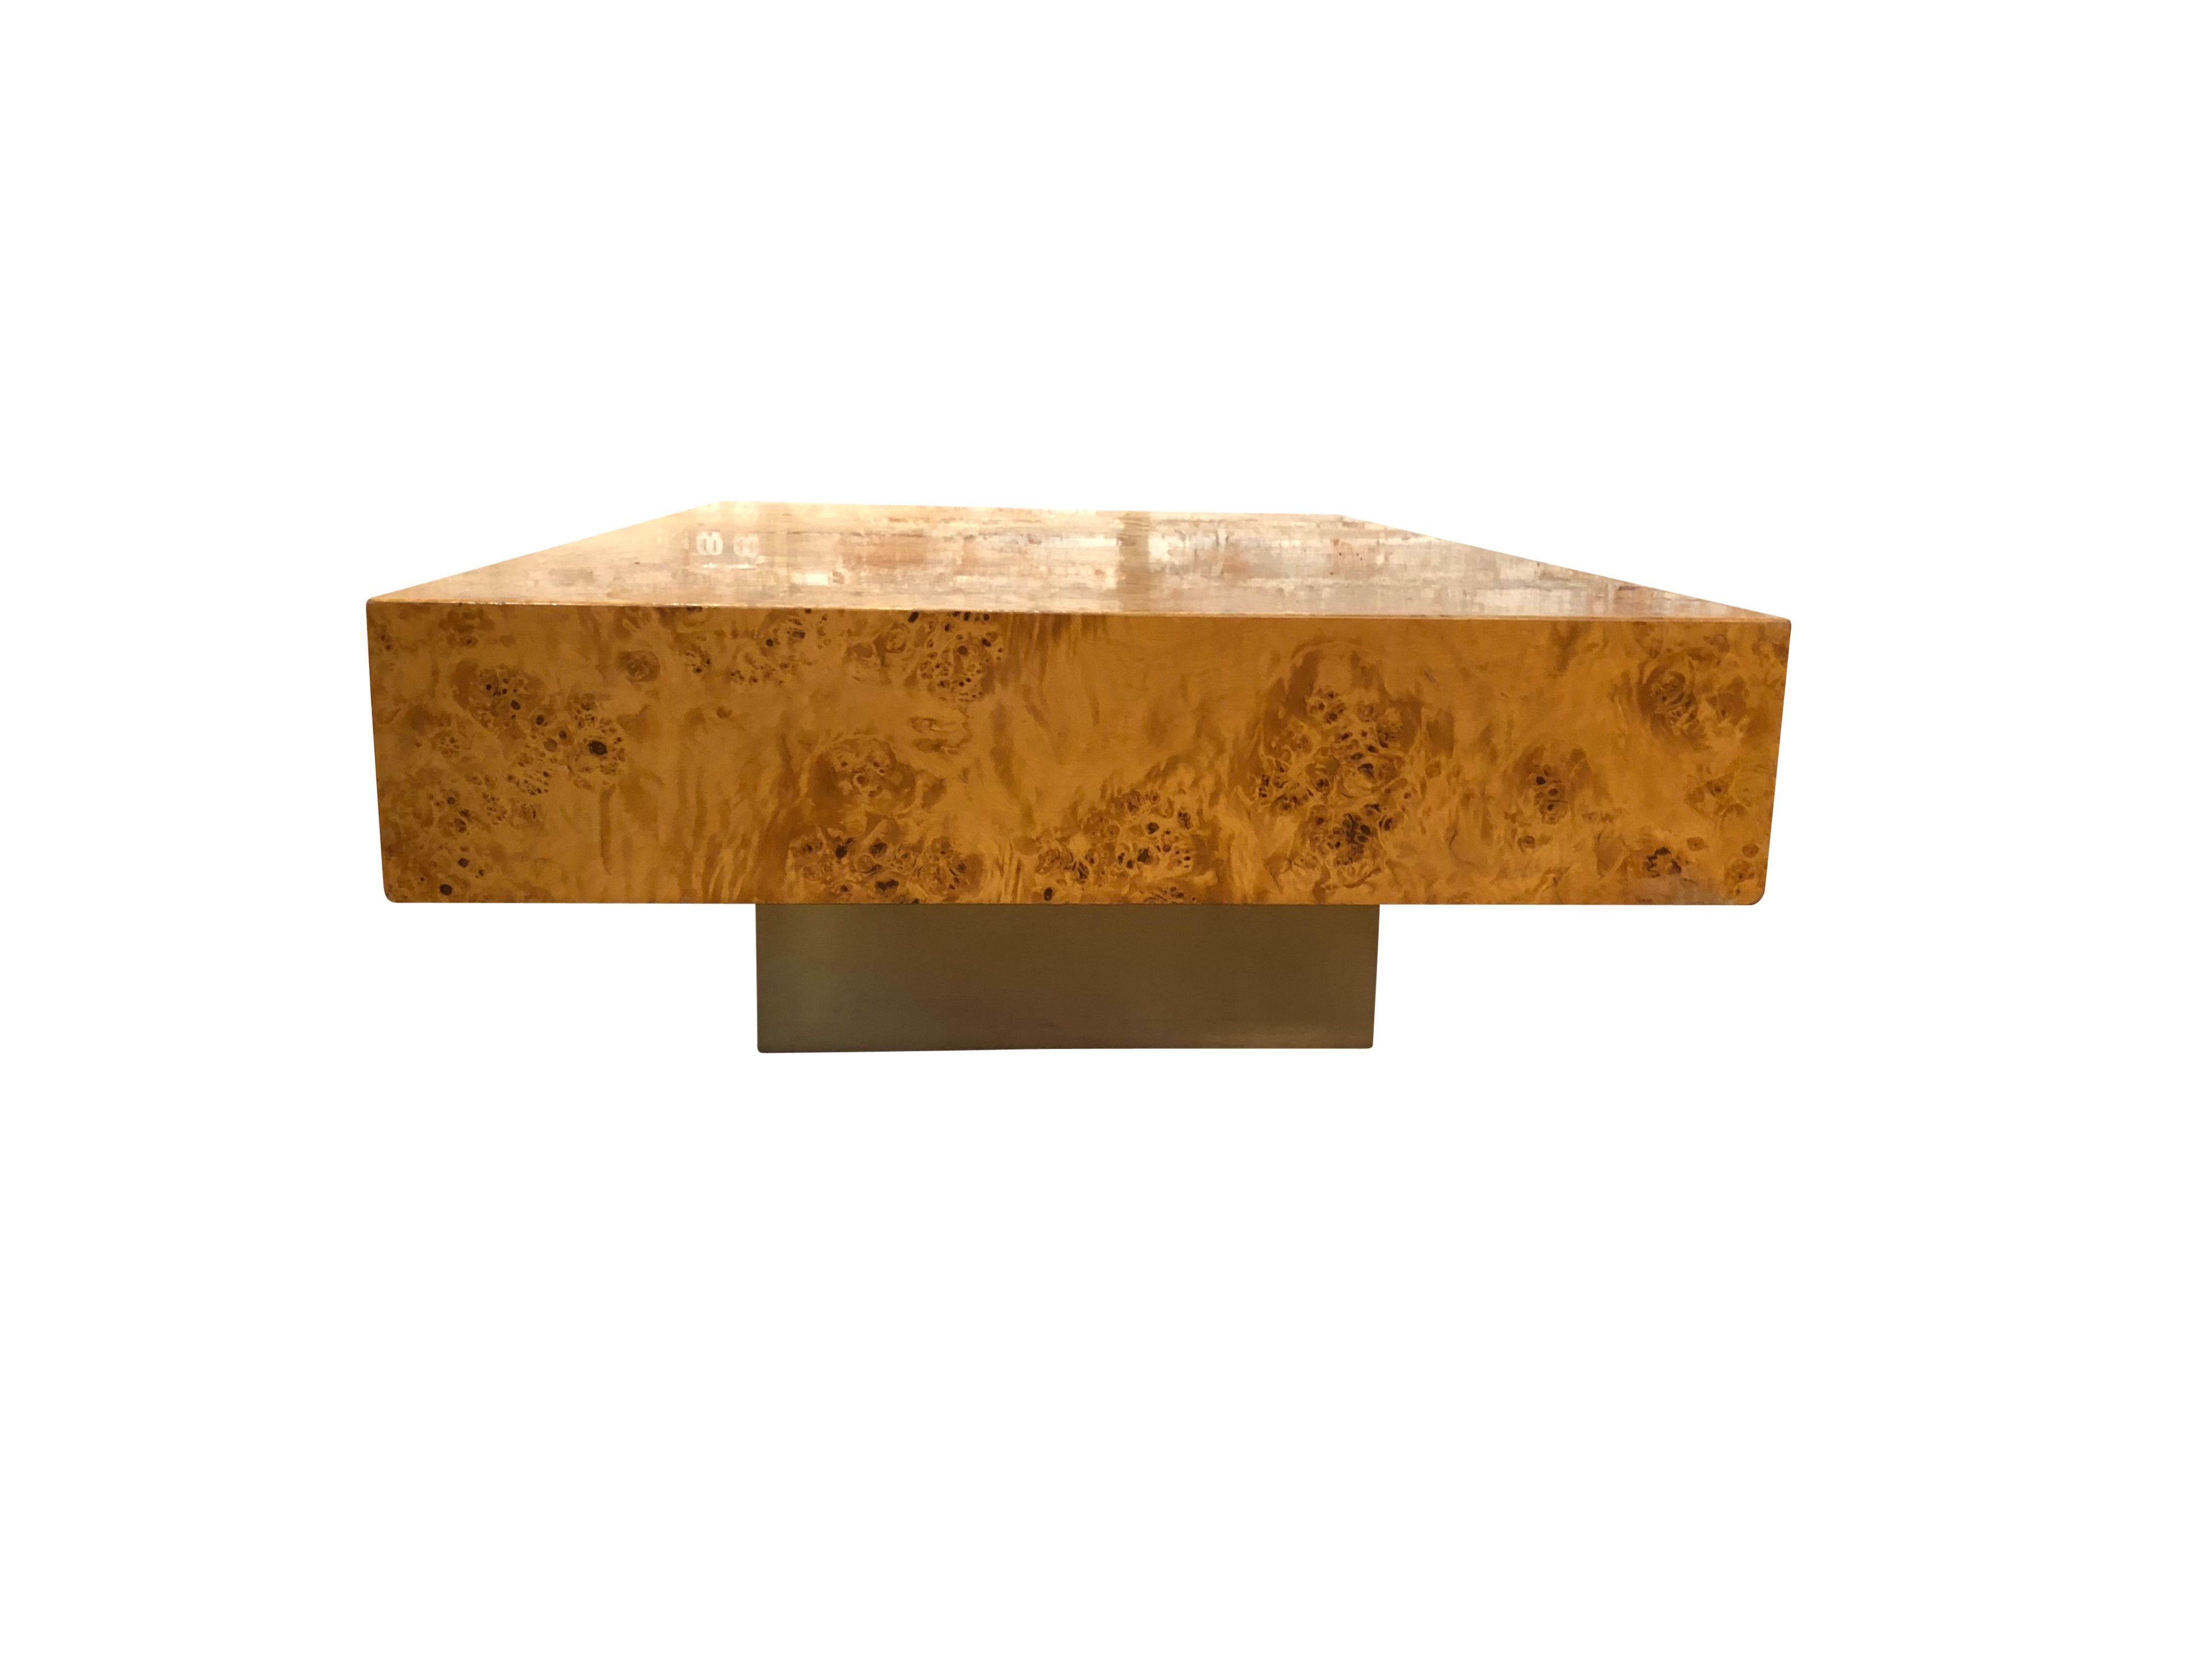 Art Deco Attractive Vintage French Burl Wood Coffee Table Made by Christofle Paris